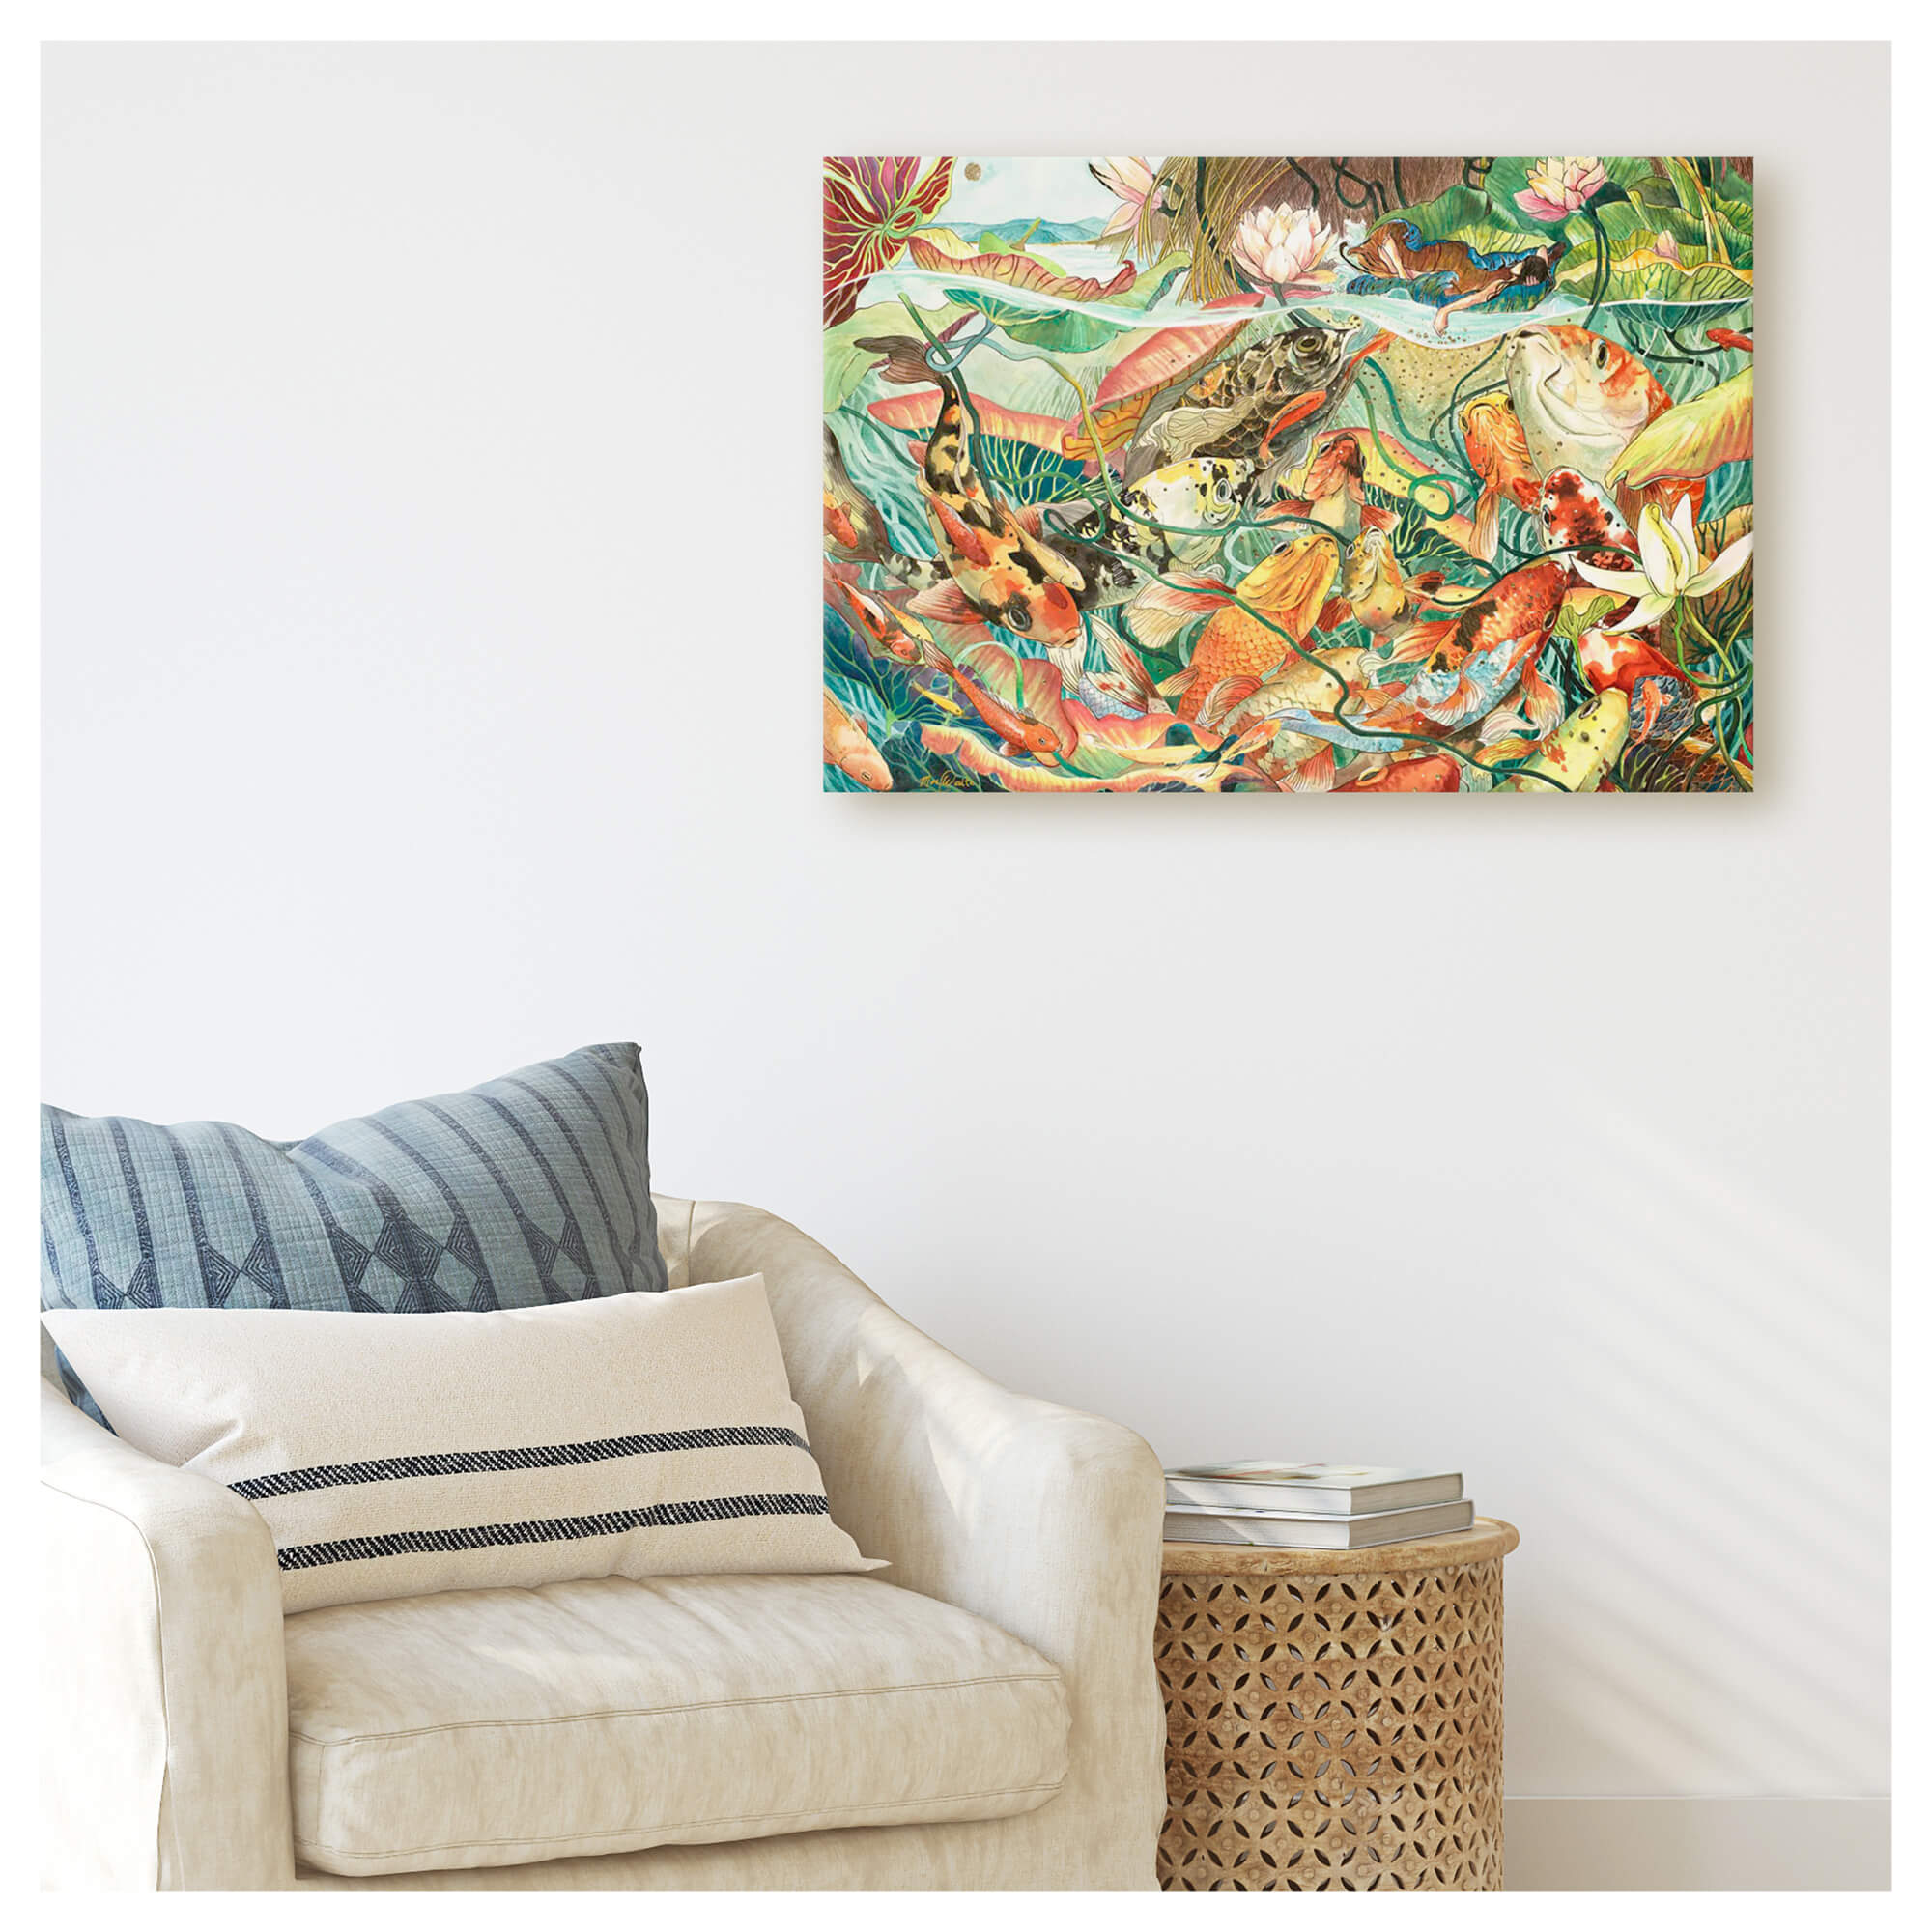 A canvas giclée print of a lady among koi fish in underwater art by Hawaii artist Mae Waite